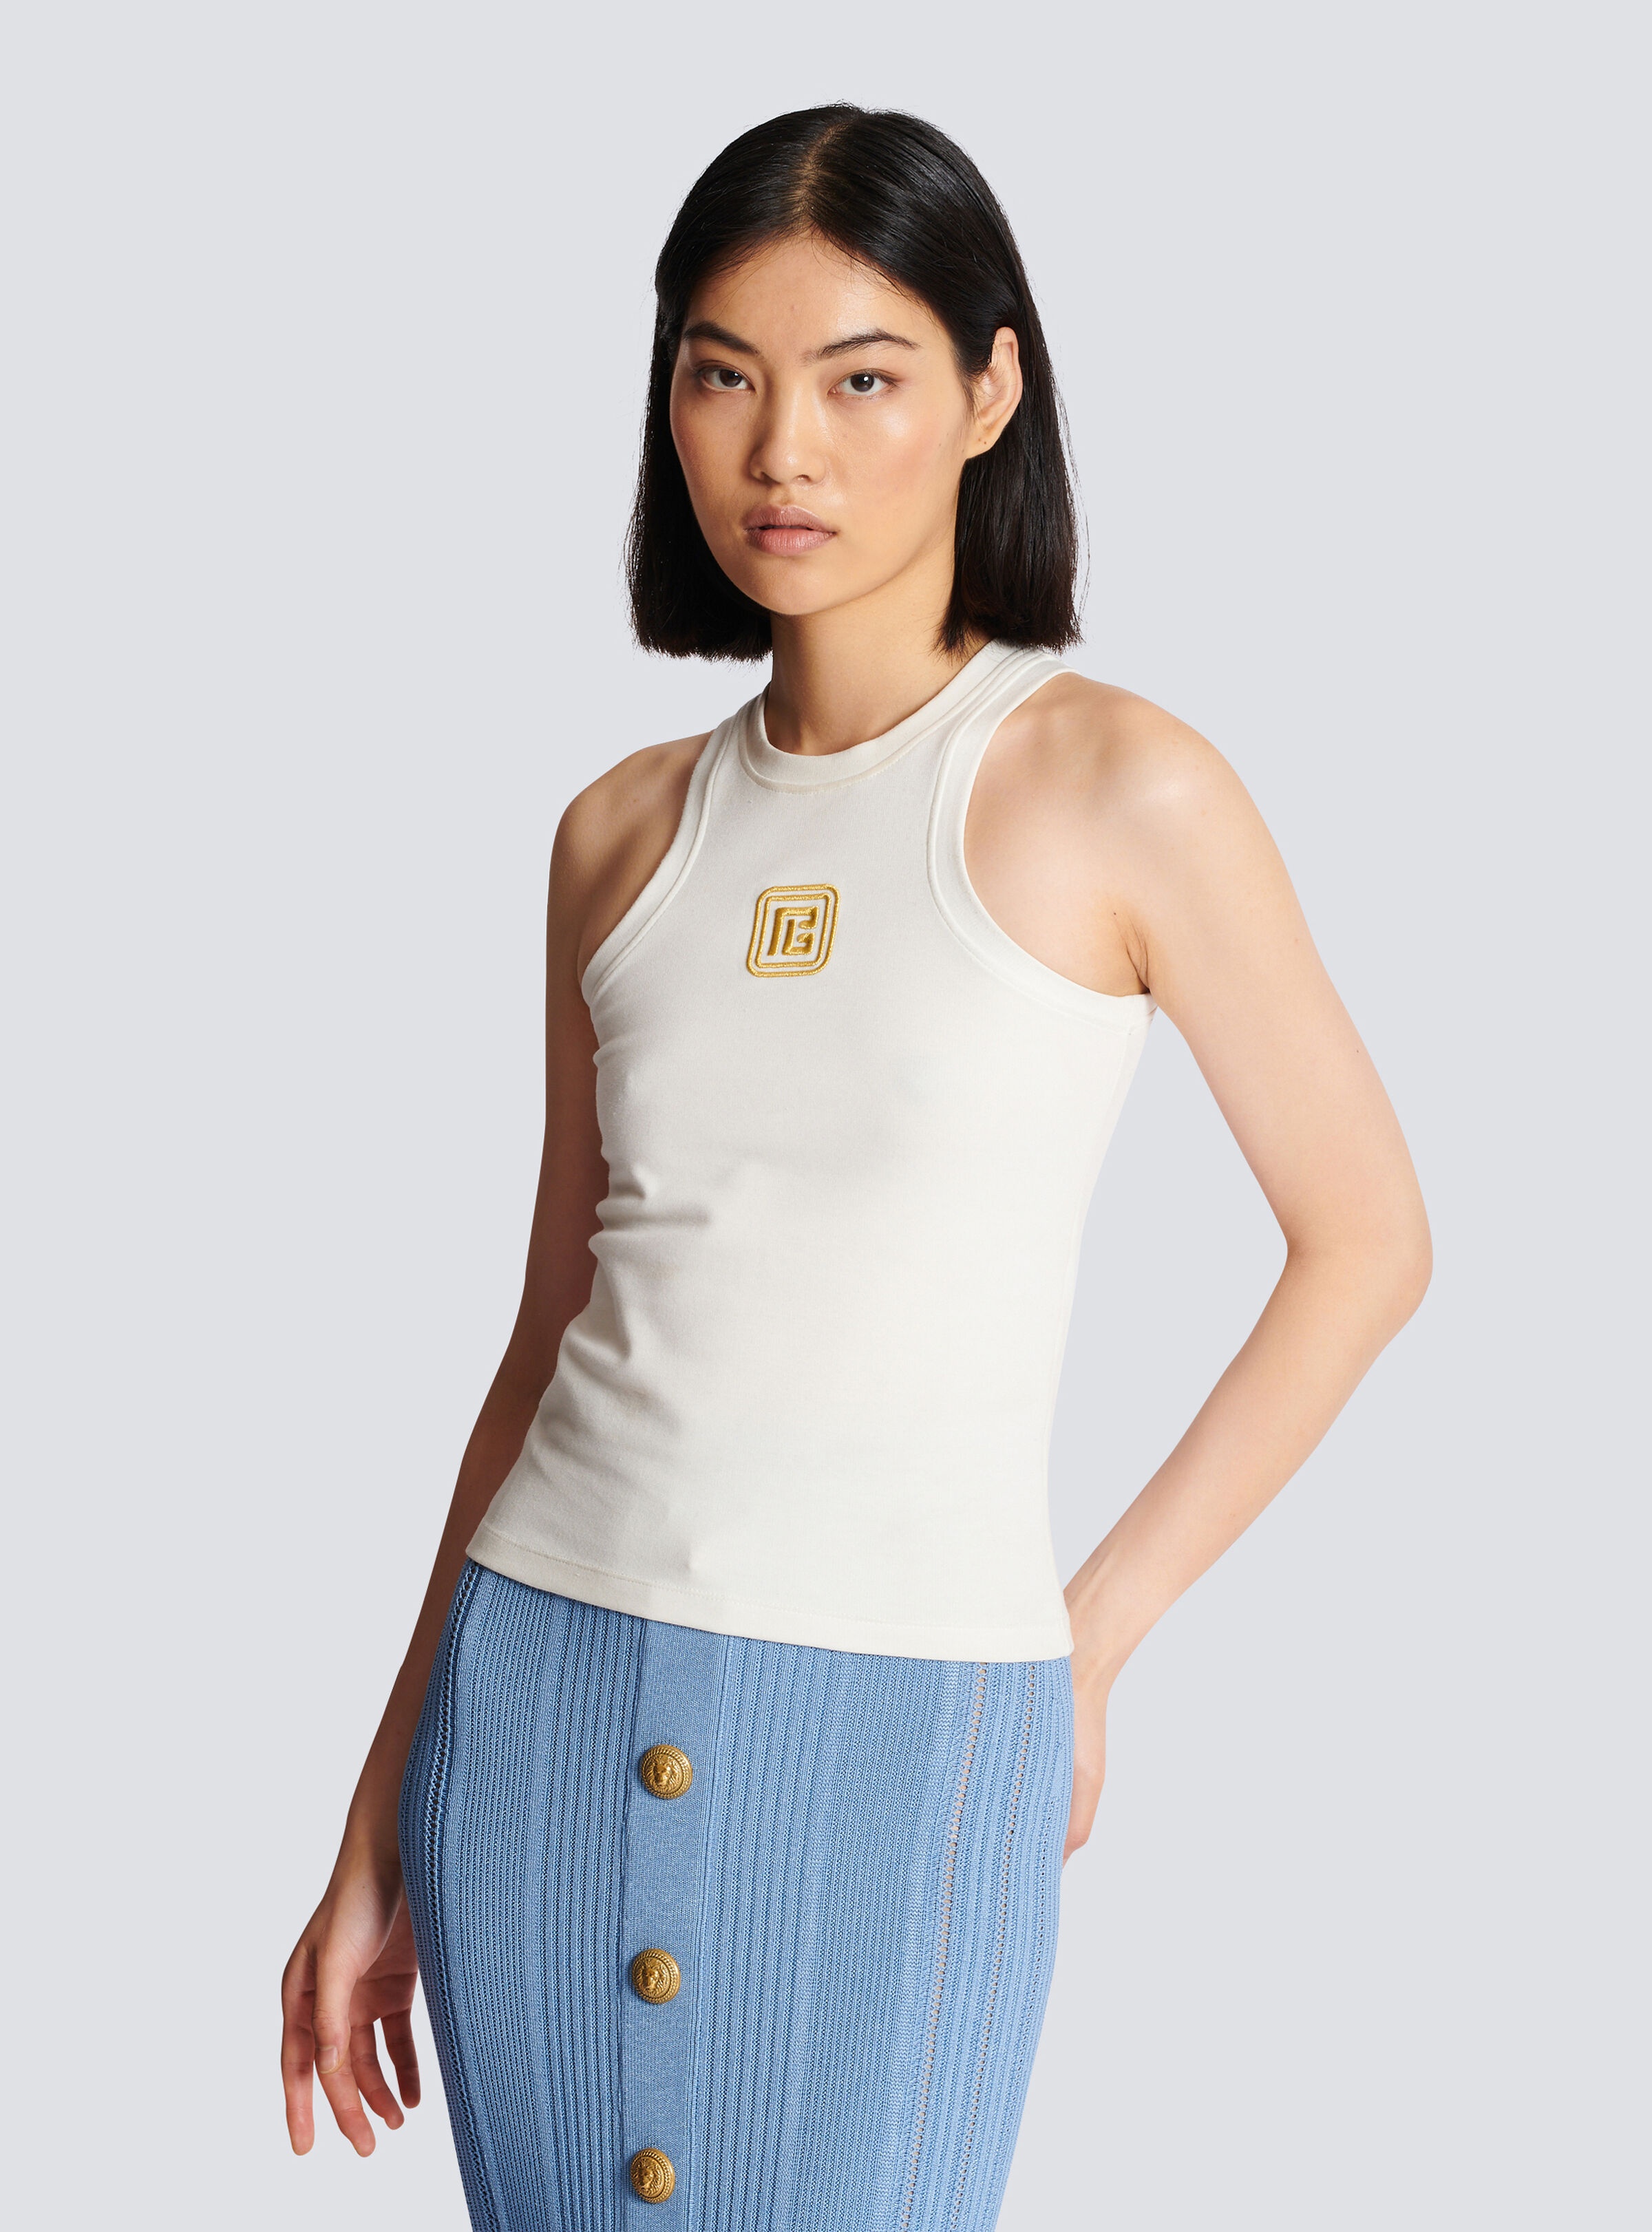 PB embroidered tank top - 6